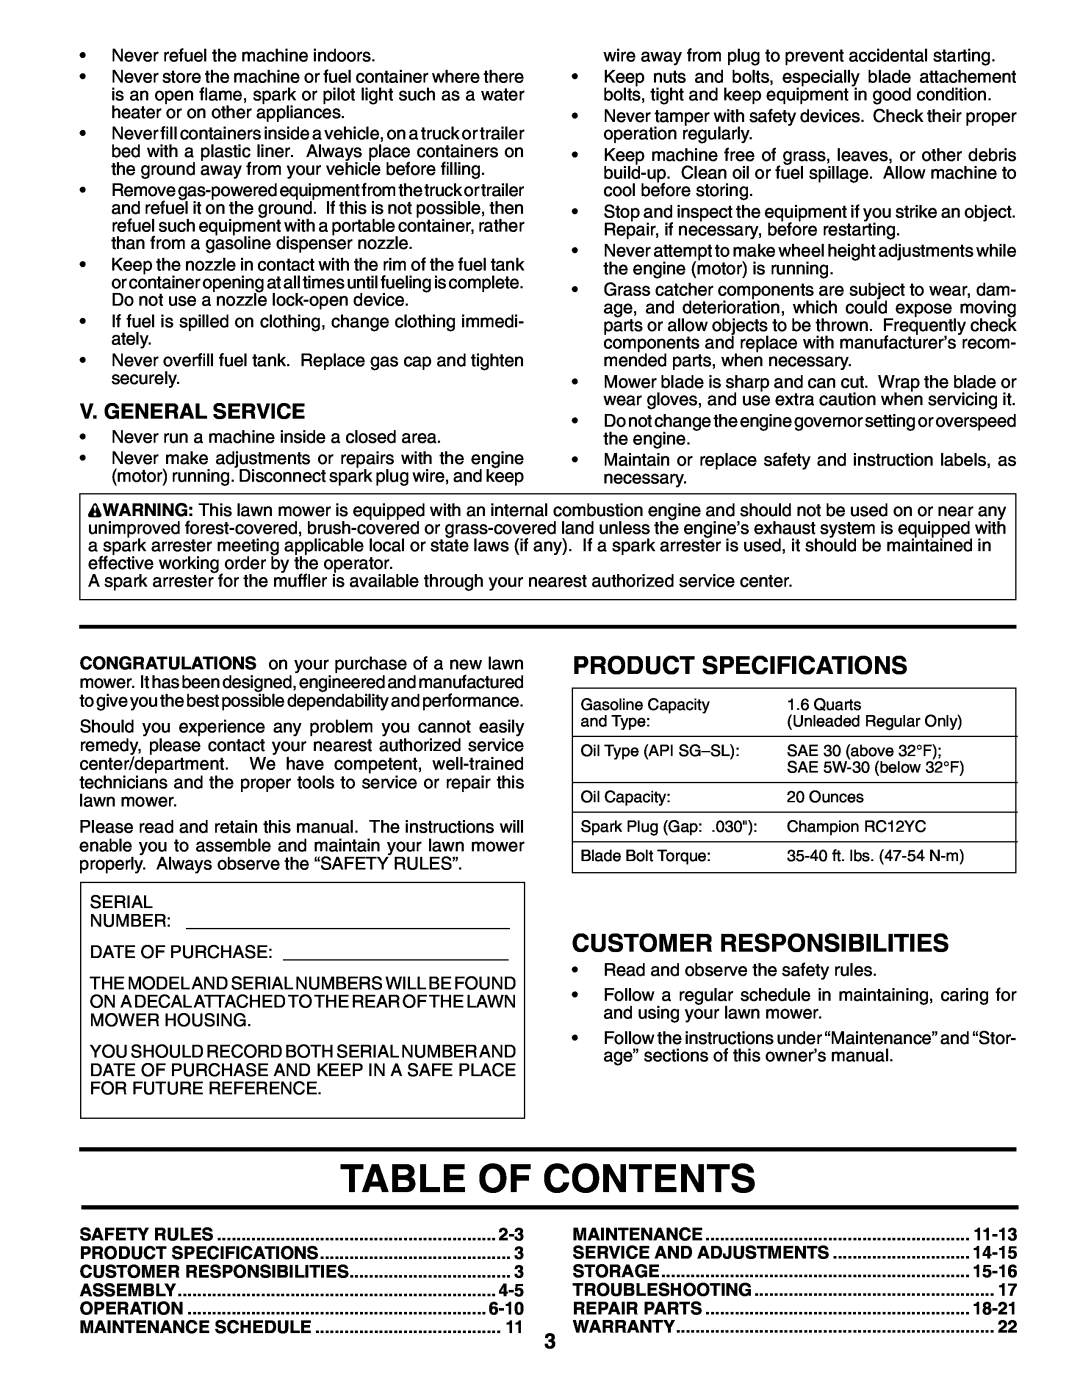 Husqvarna 87521RES Table Of Contents, Product Specifications, Customer Responsibilities, V. General Service, 11-13, 14-15 